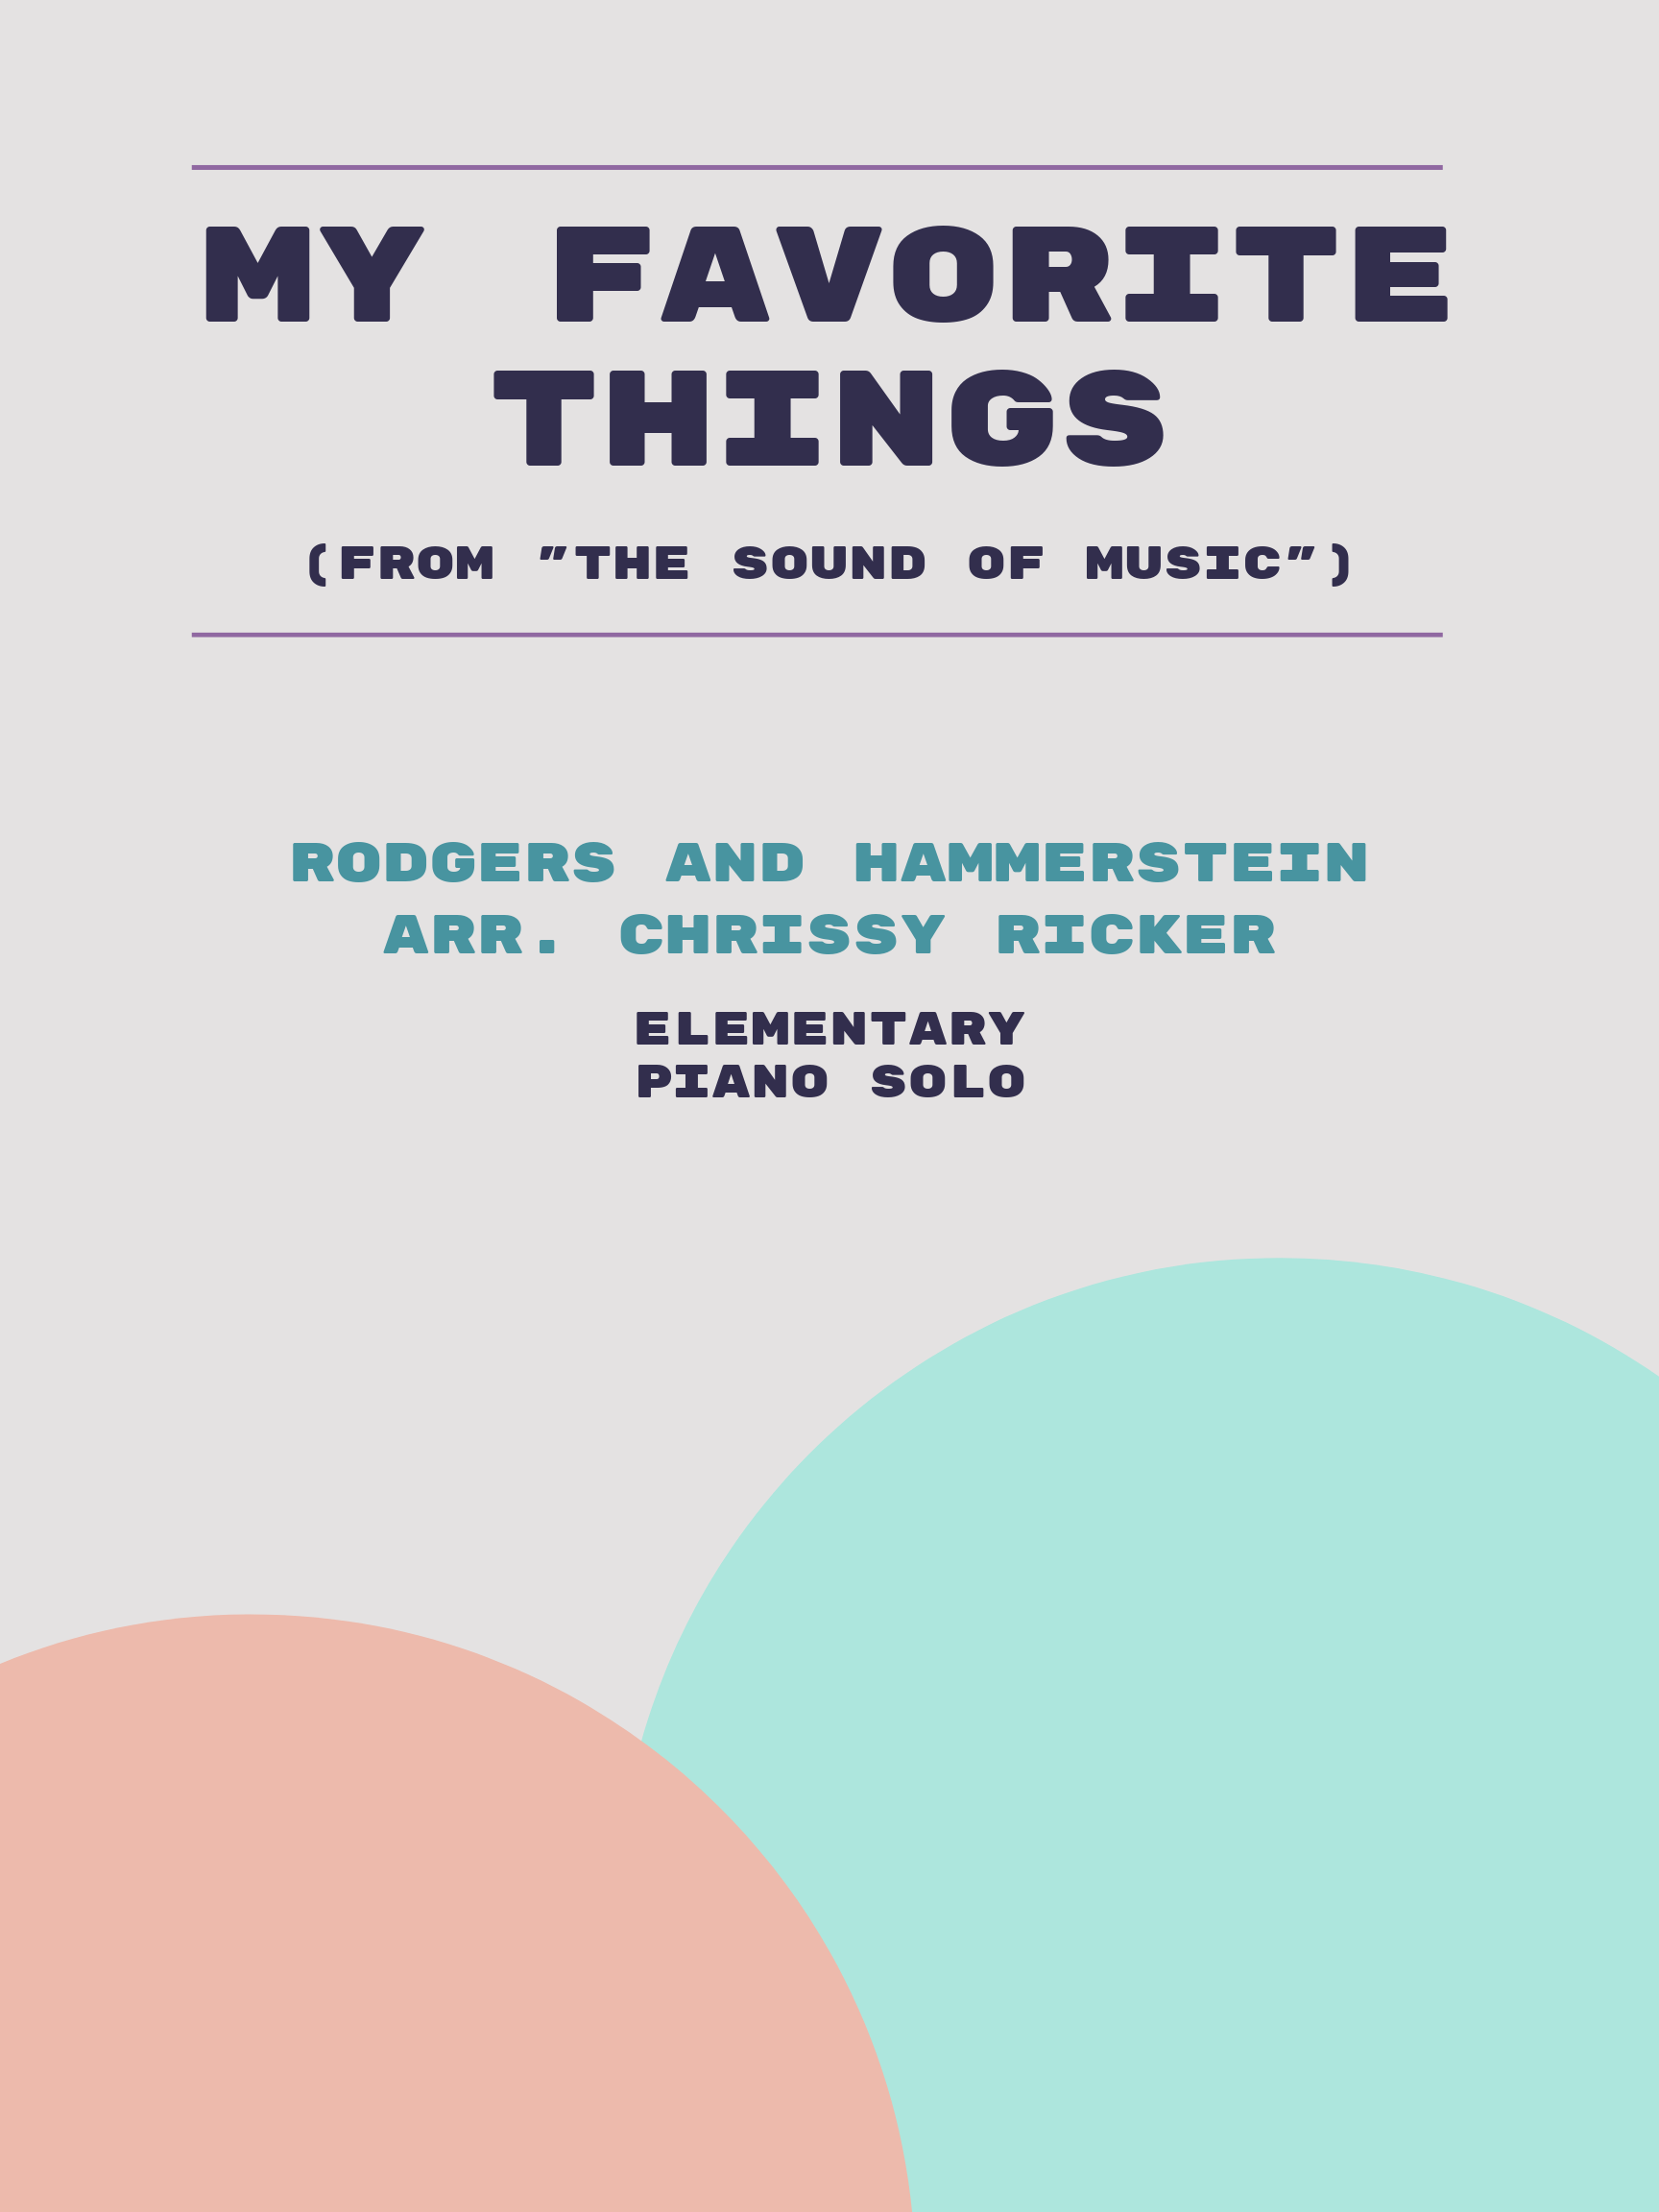 My Favorite Things by Rodgers and Hammerstein